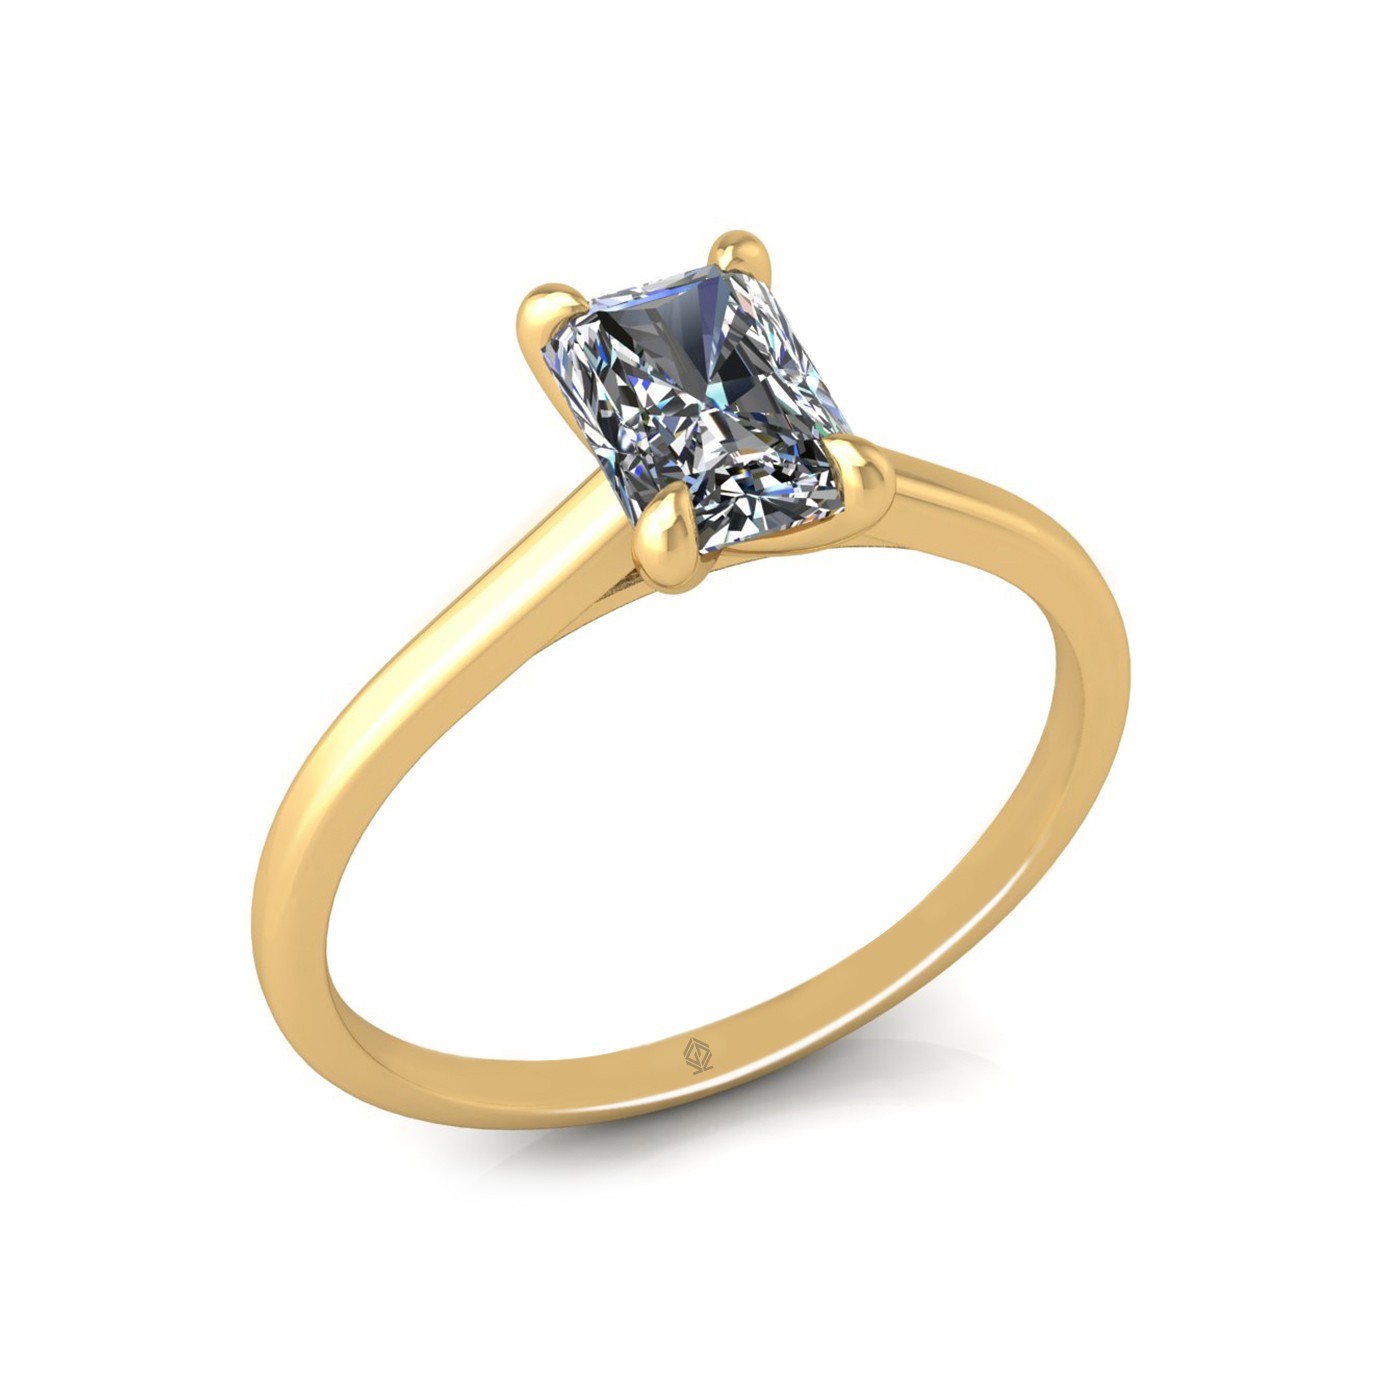 18K YELLOW GOLD 4 PRONGS SOLITAIRE RADIANT CUT DIAMOND ENGAGEMENT RING WITH WHISPER THIN BAND